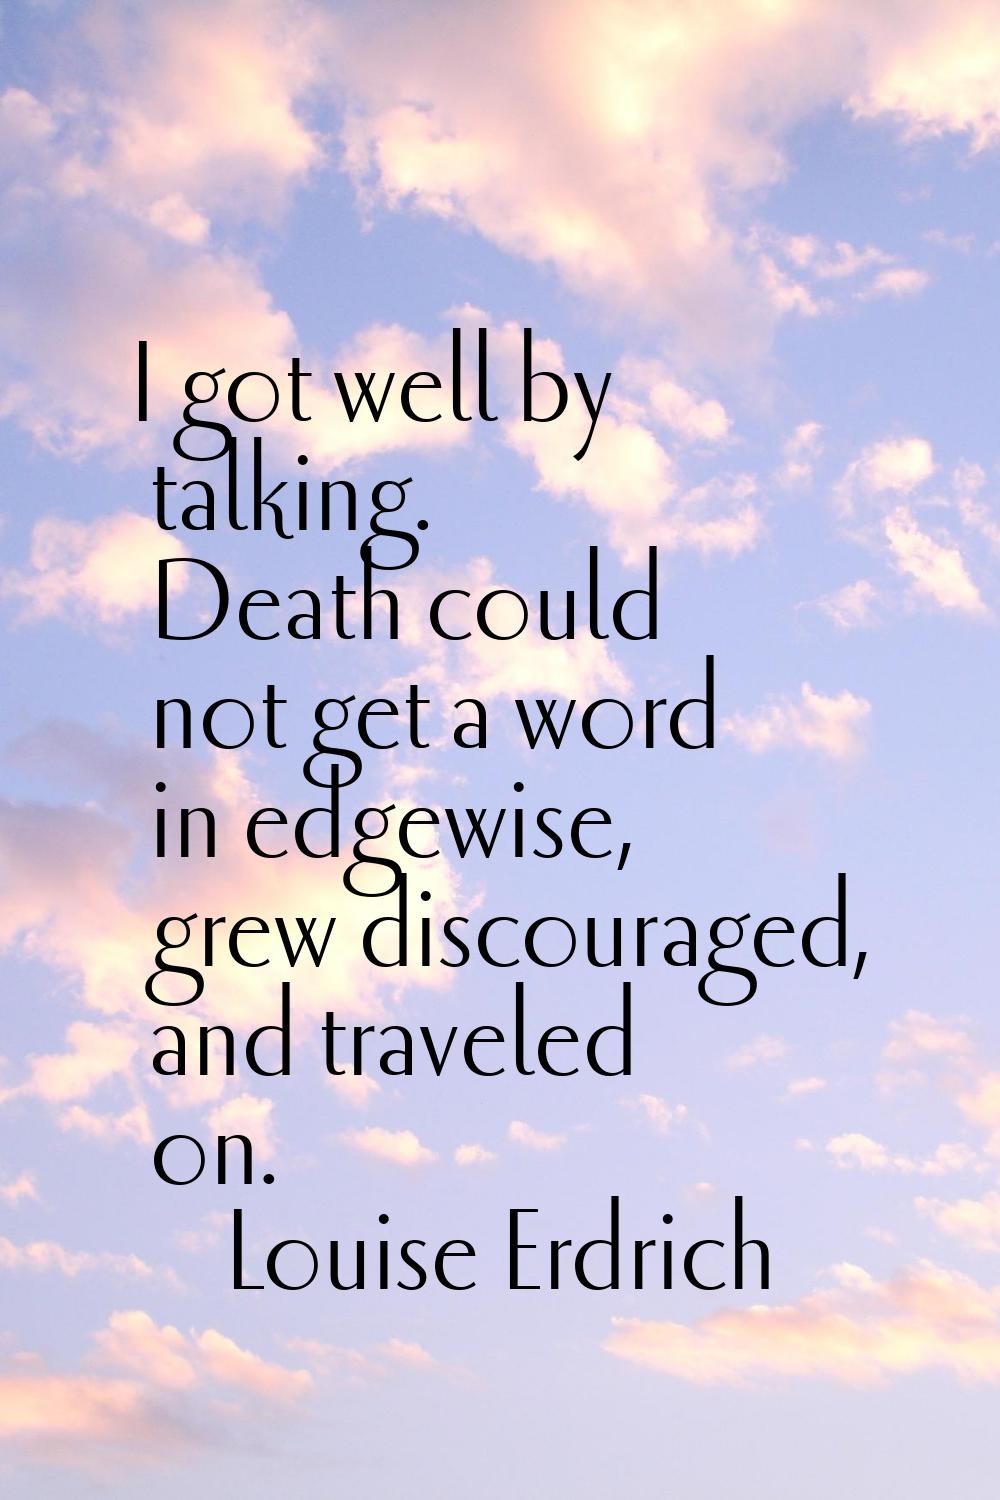 I got well by talking. Death could not get a word in edgewise, grew discouraged, and traveled on.